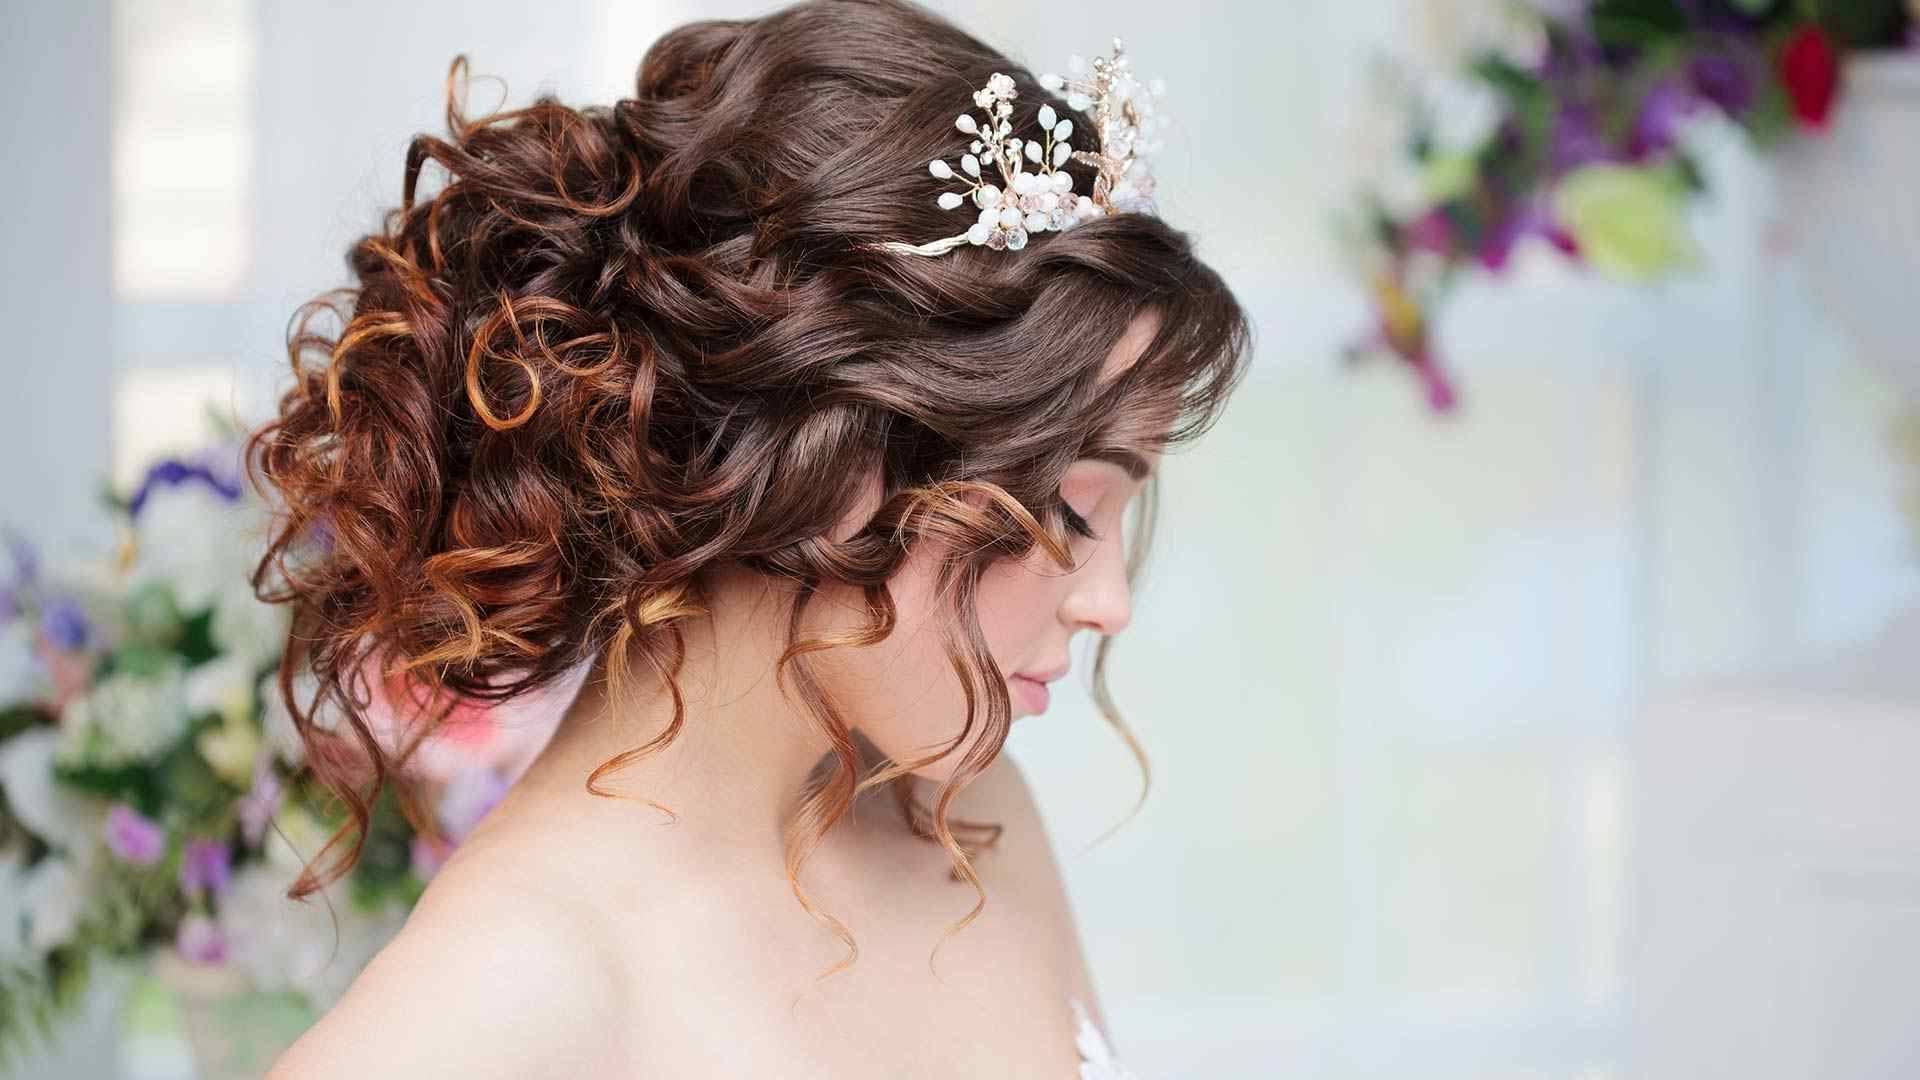 15 Easy Curly Hair Updos You'll Love – L'oréal Paris In Updo For Long Curly Hair (View 18 of 25)